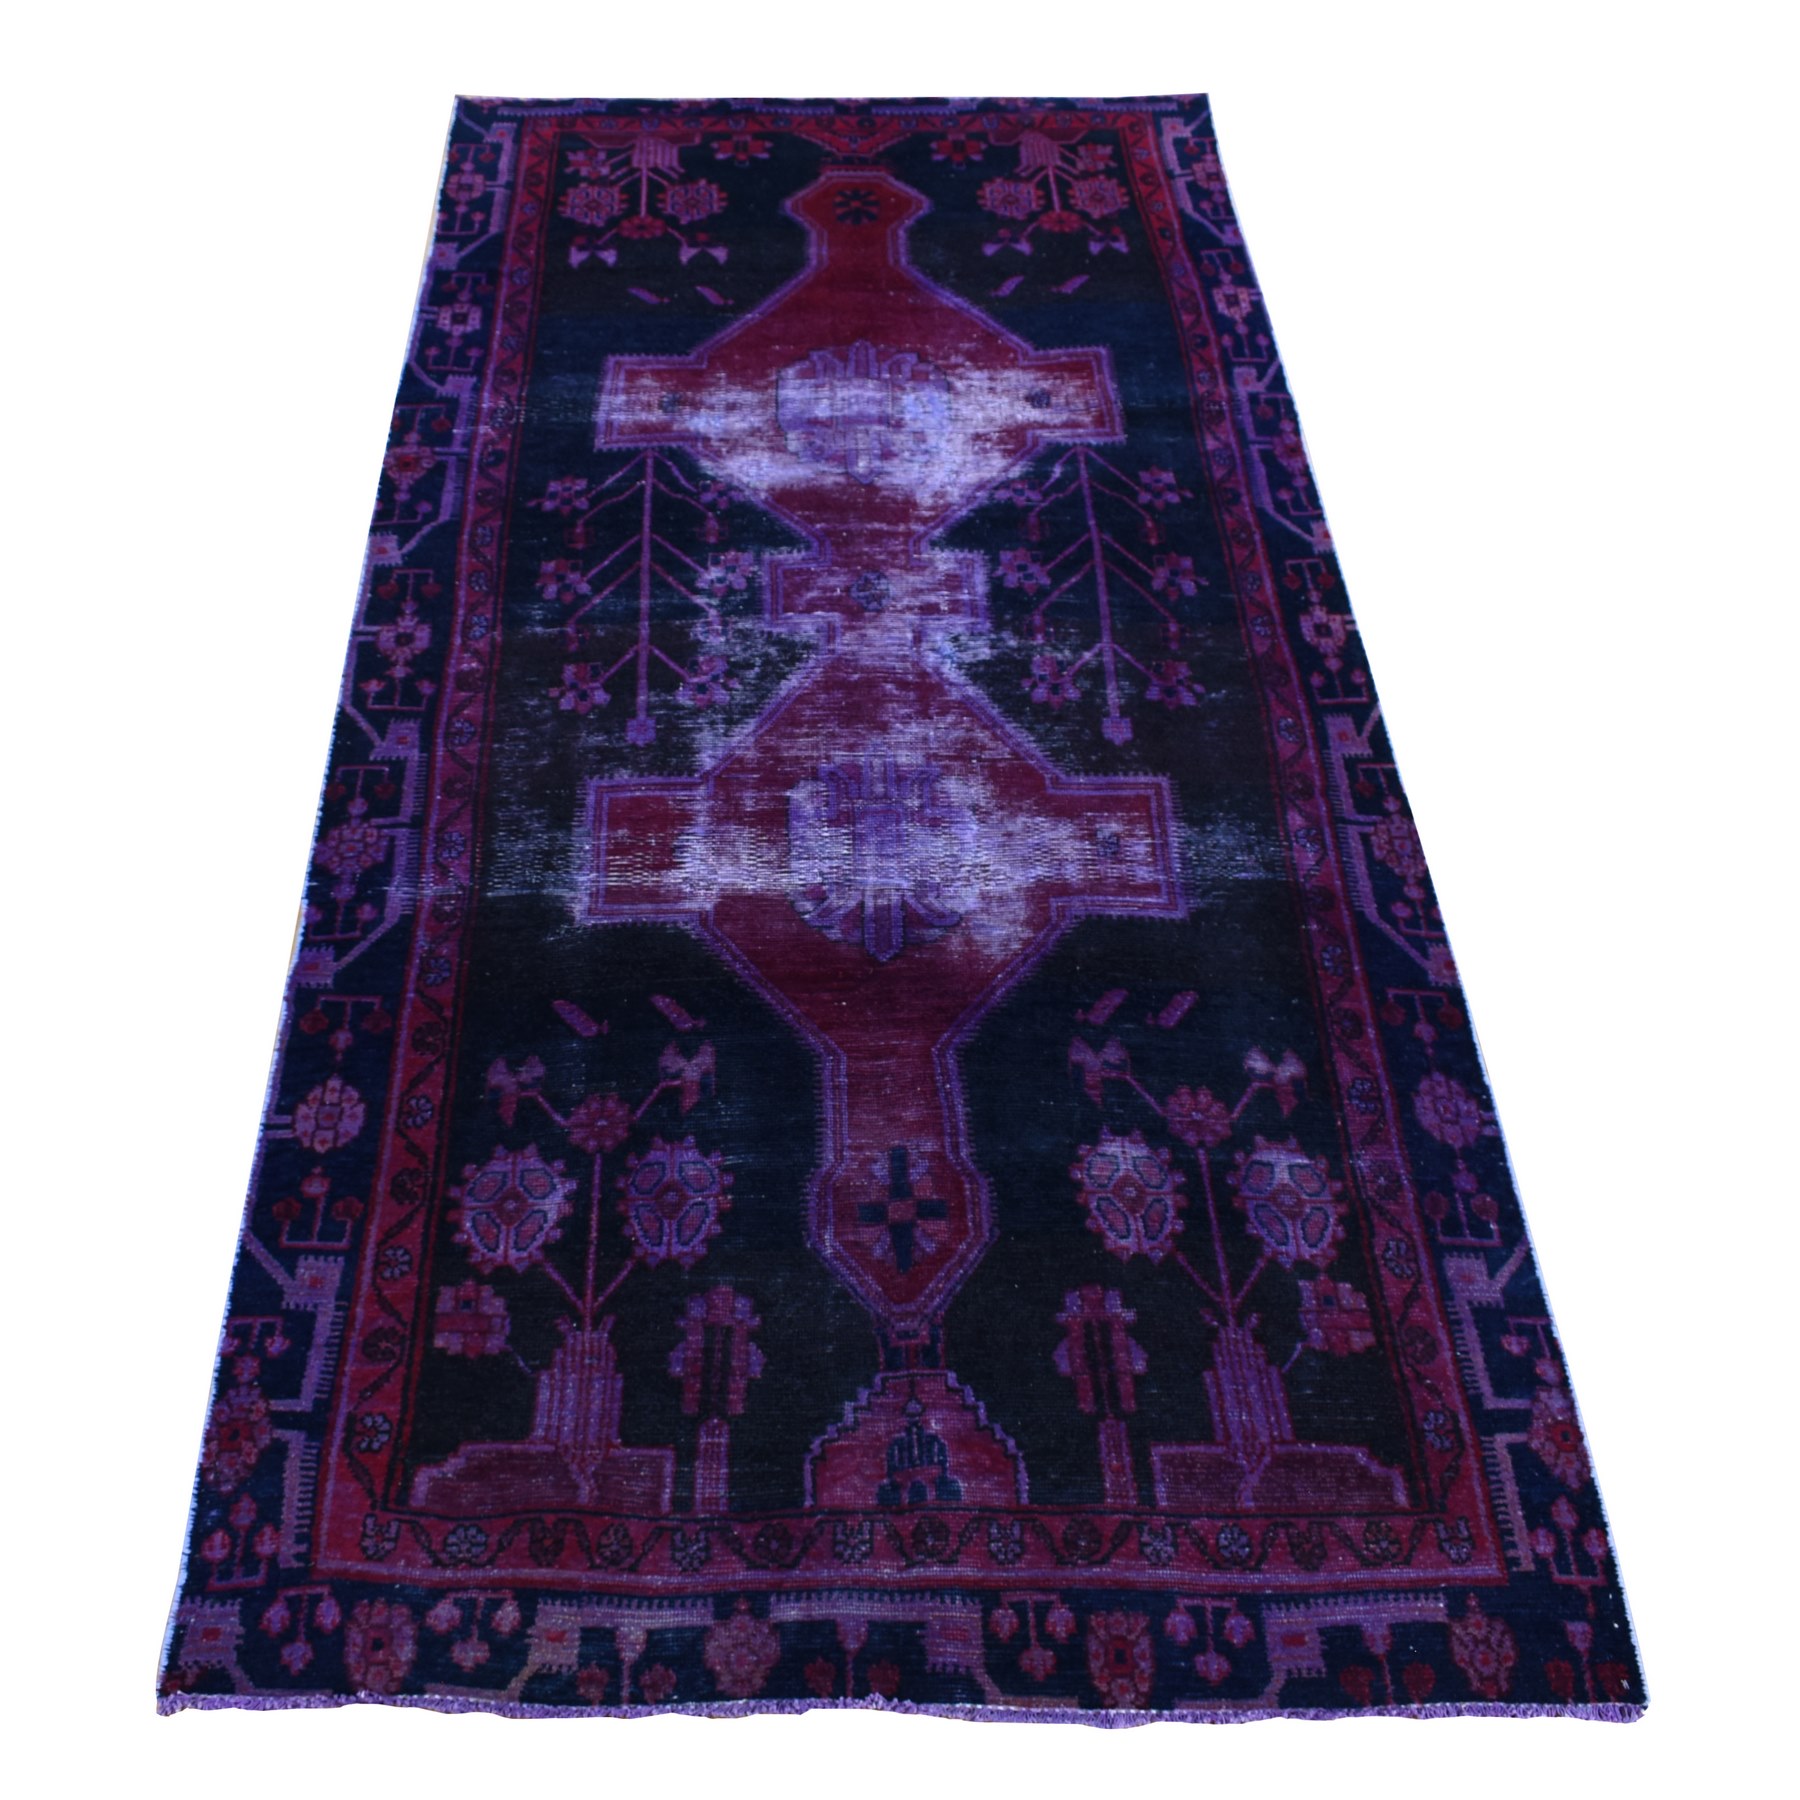 4'6"x10' Pansy Purple, Clearance, Overdyed Vintage Persian Hamadan, Hand Woven, Soft Wool, Wide Runner, Oriental Rug 